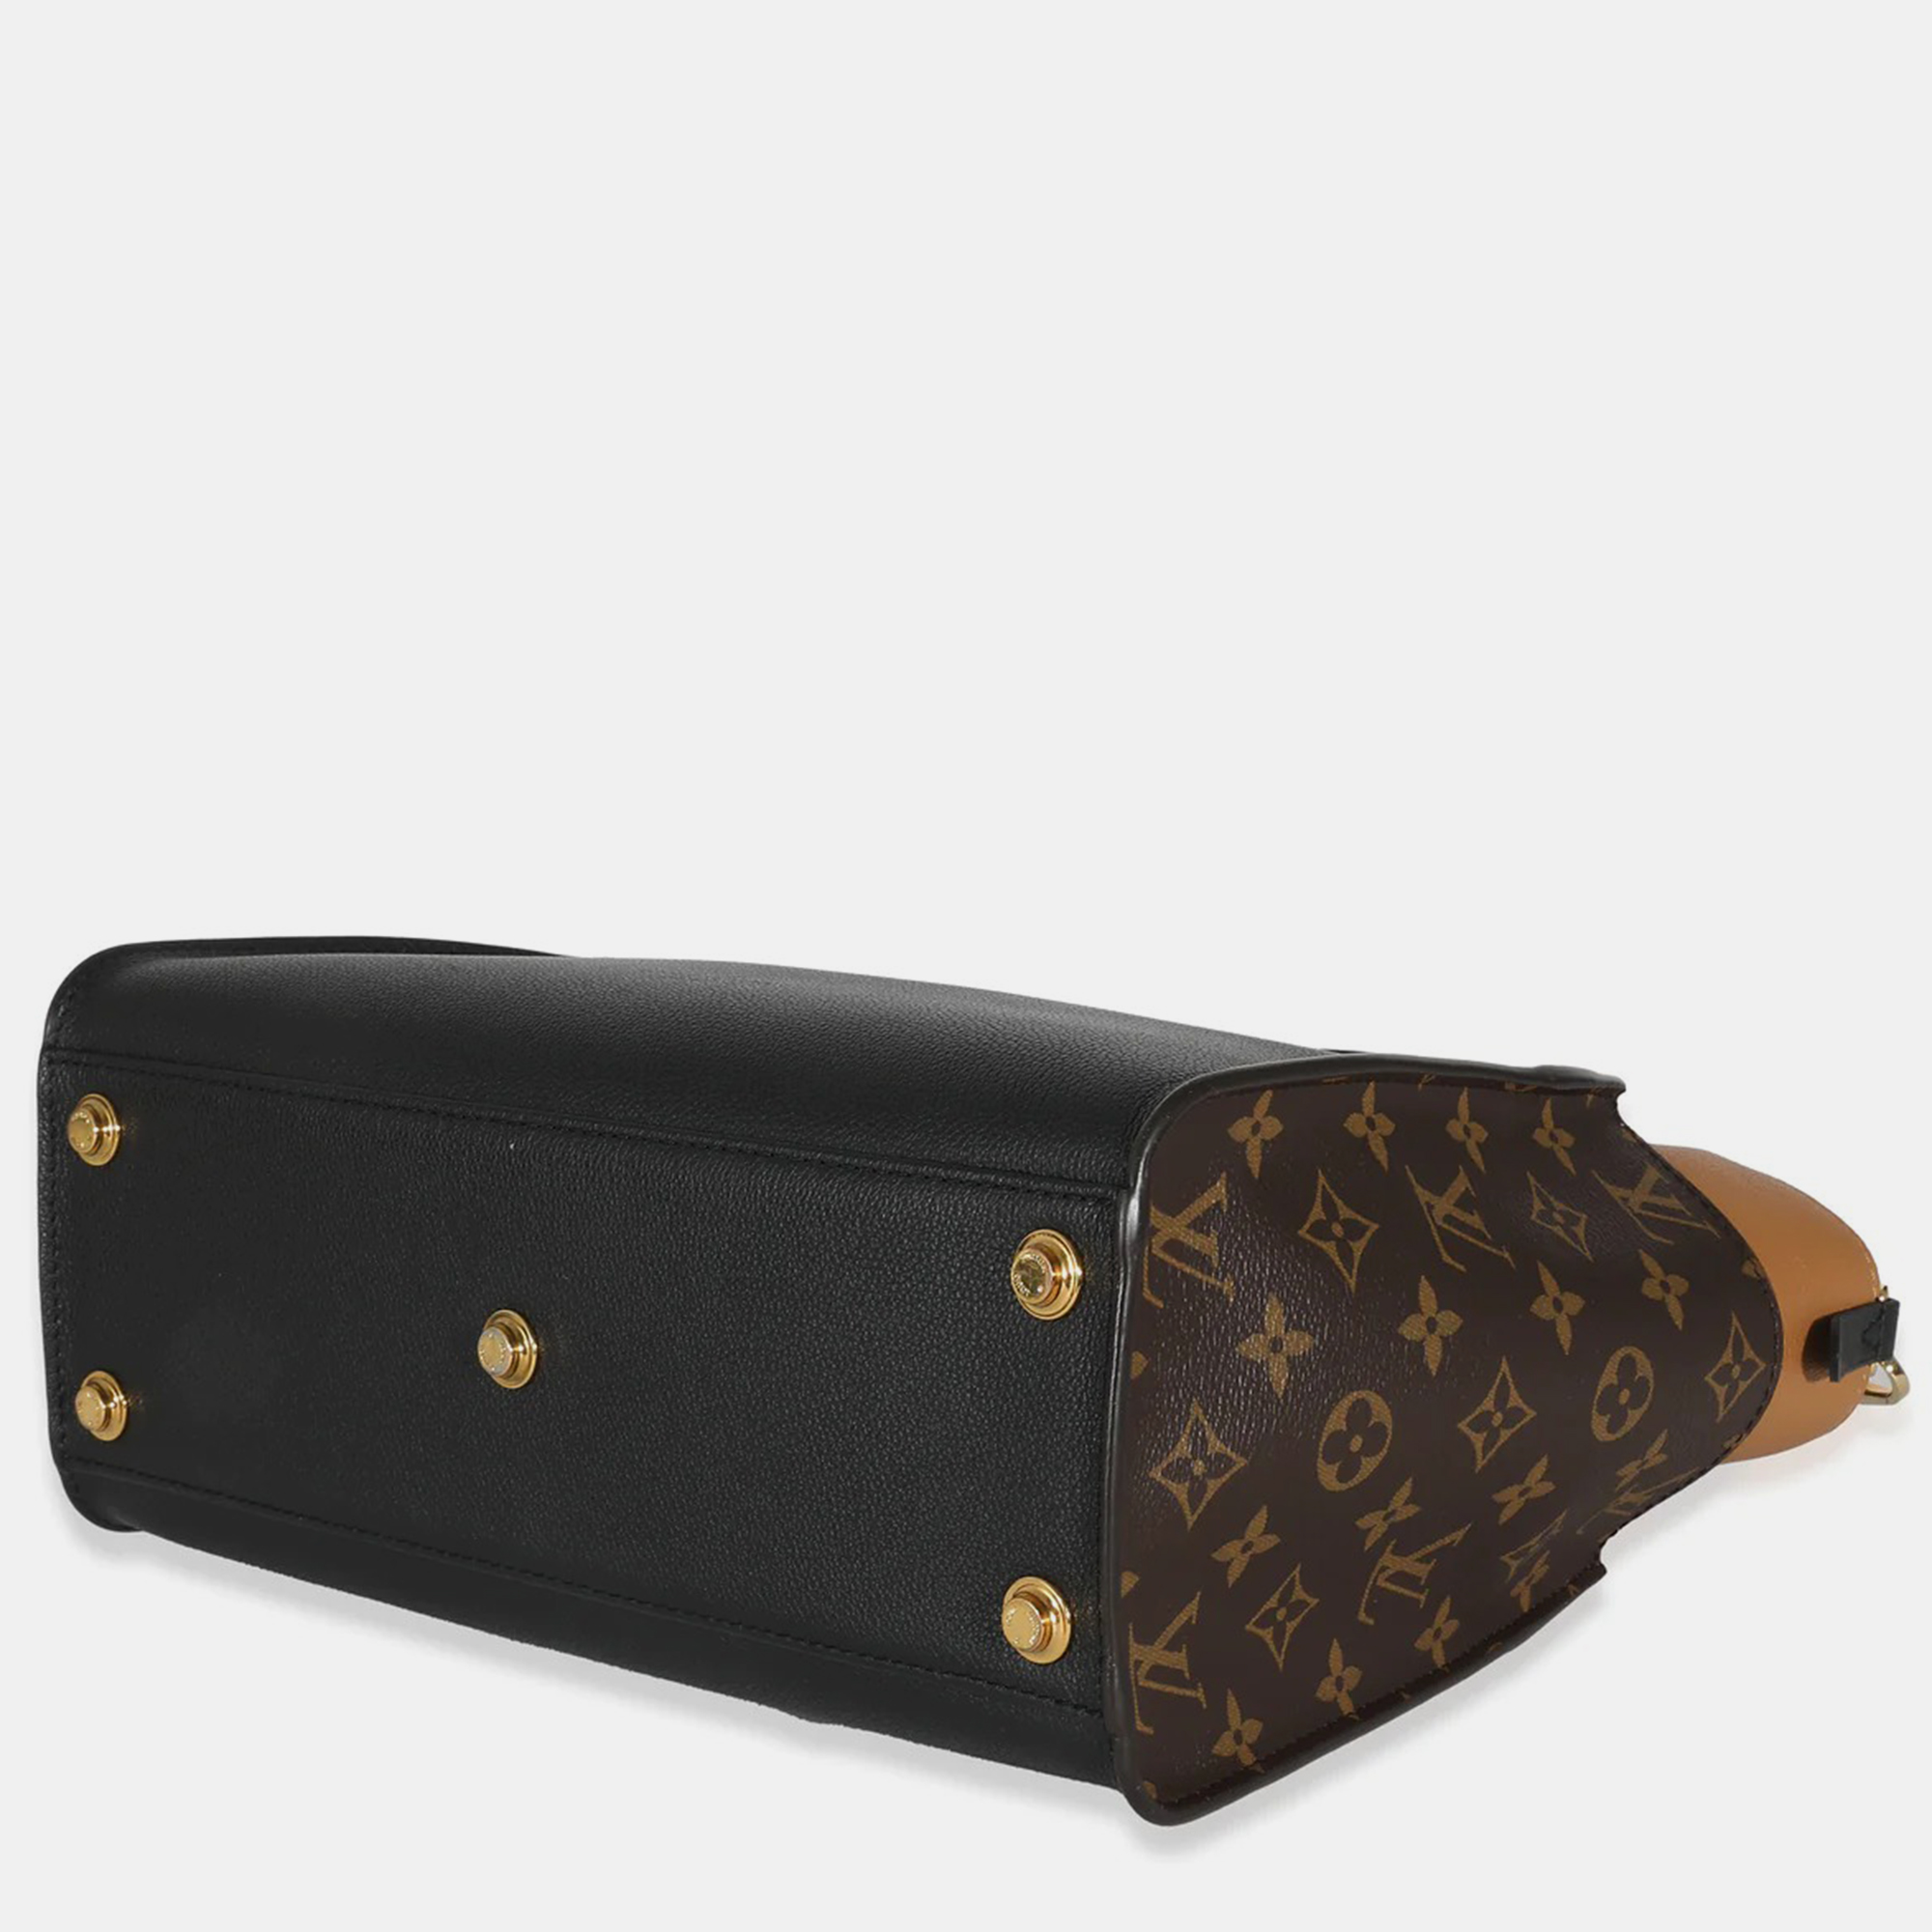 Louis Vuitton Black Monogram Leather And Canvas On My Side MM Tote Bag